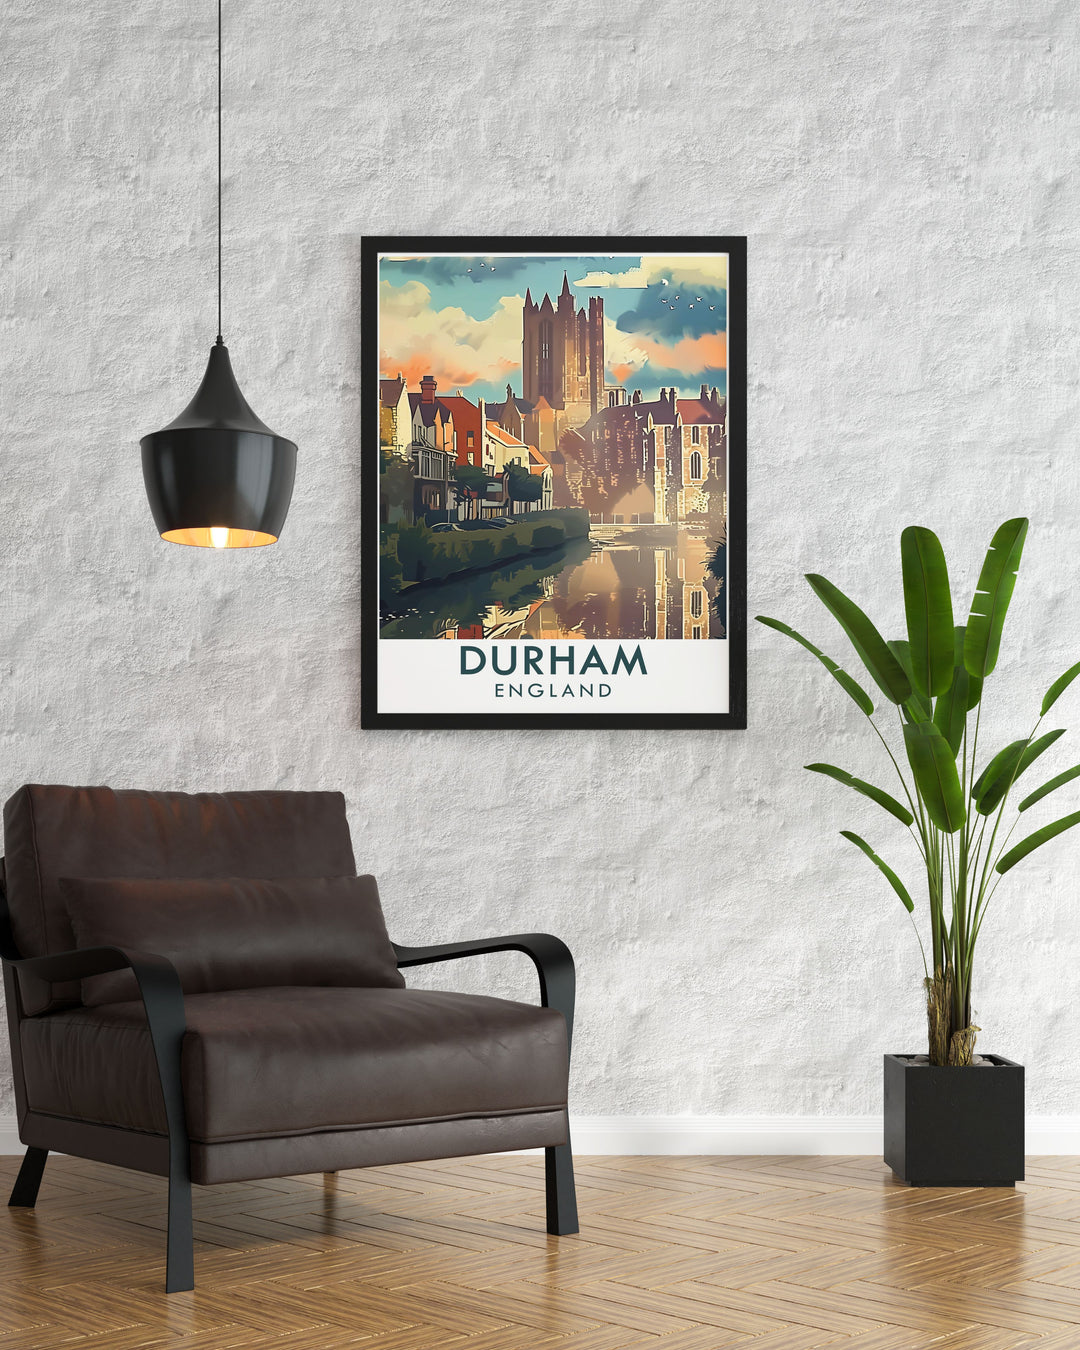 The spiritual beauty of Durham and the grandeur of Durham Cathedral are captured in this art print, perfect for adding a touch of Englands charm to your home.